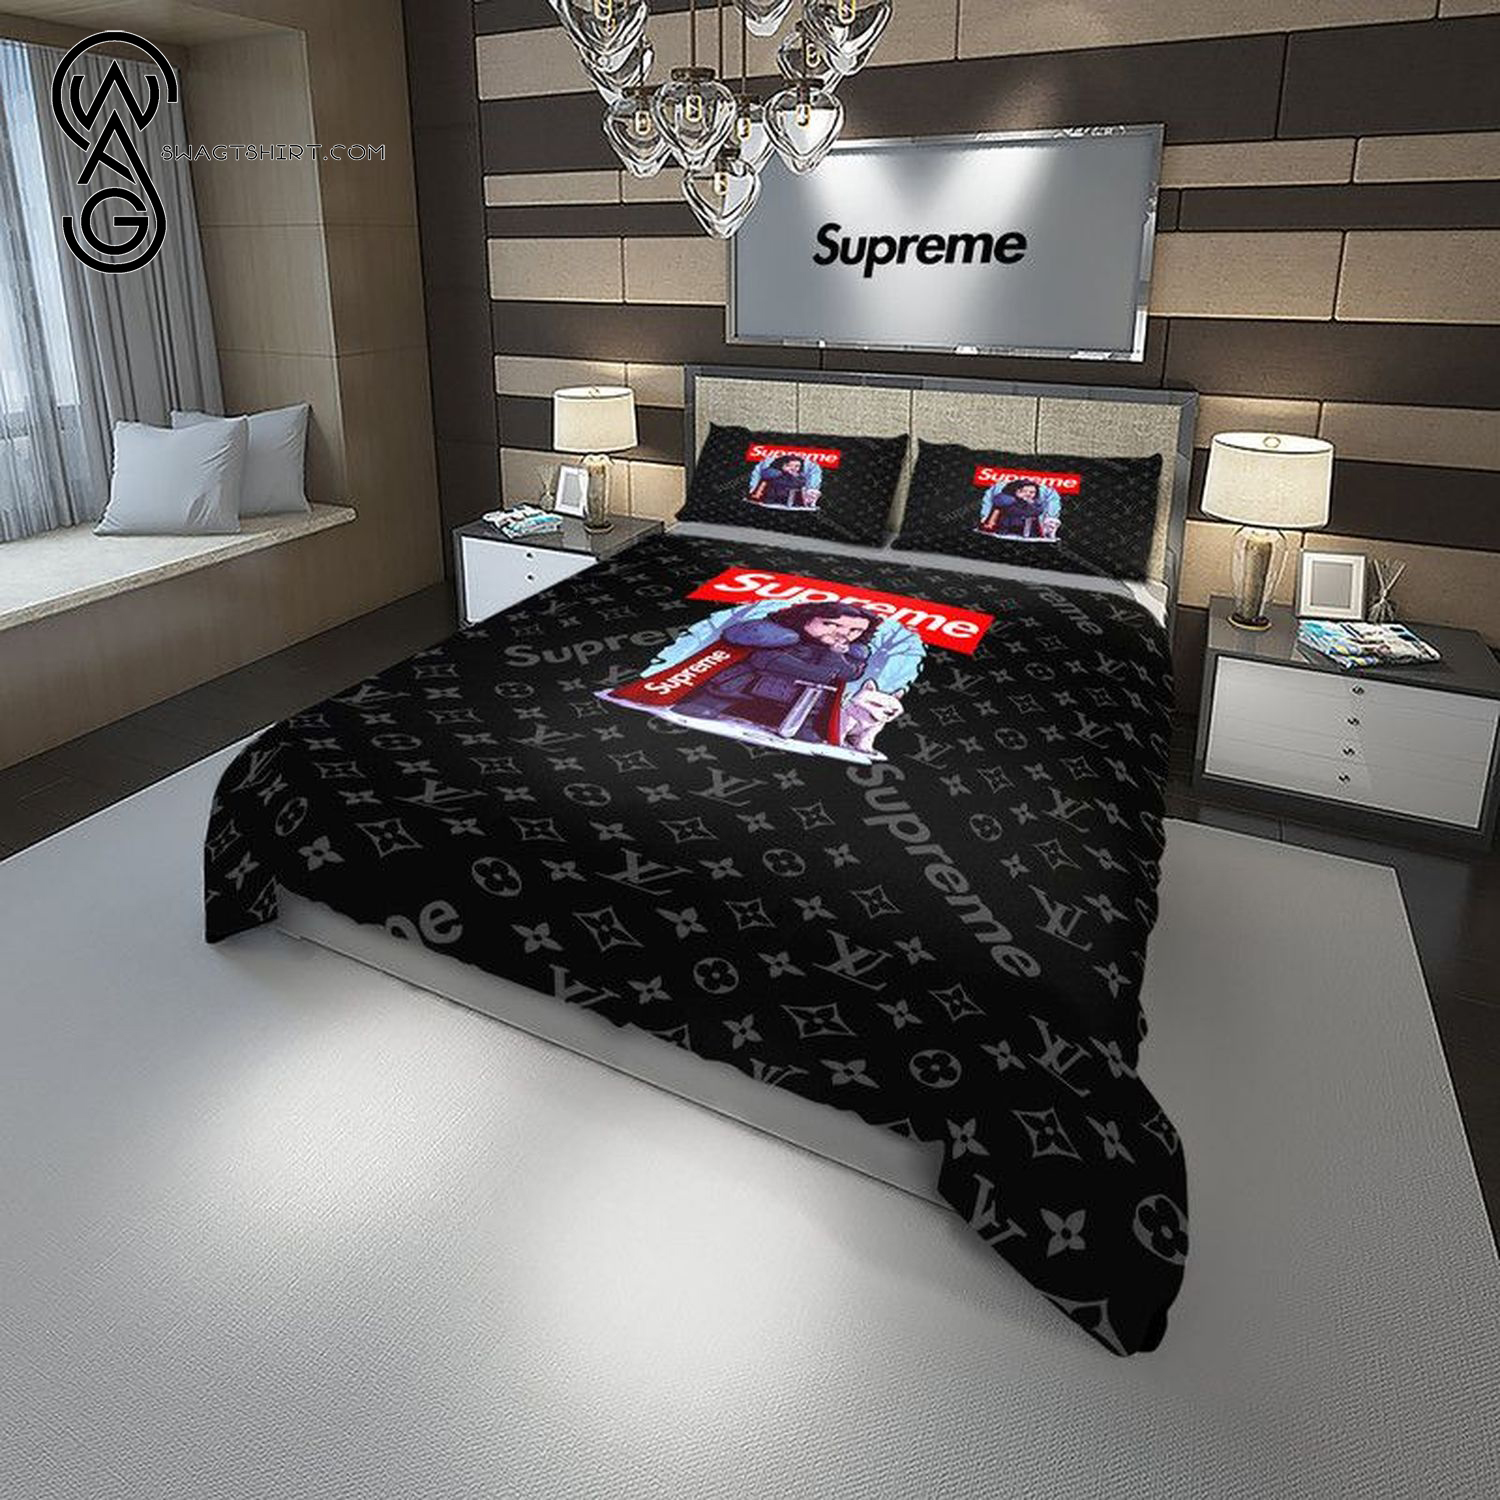 Supreme With John Snow Game of Throne All Over Print Duvet Cover Bedroom Sets